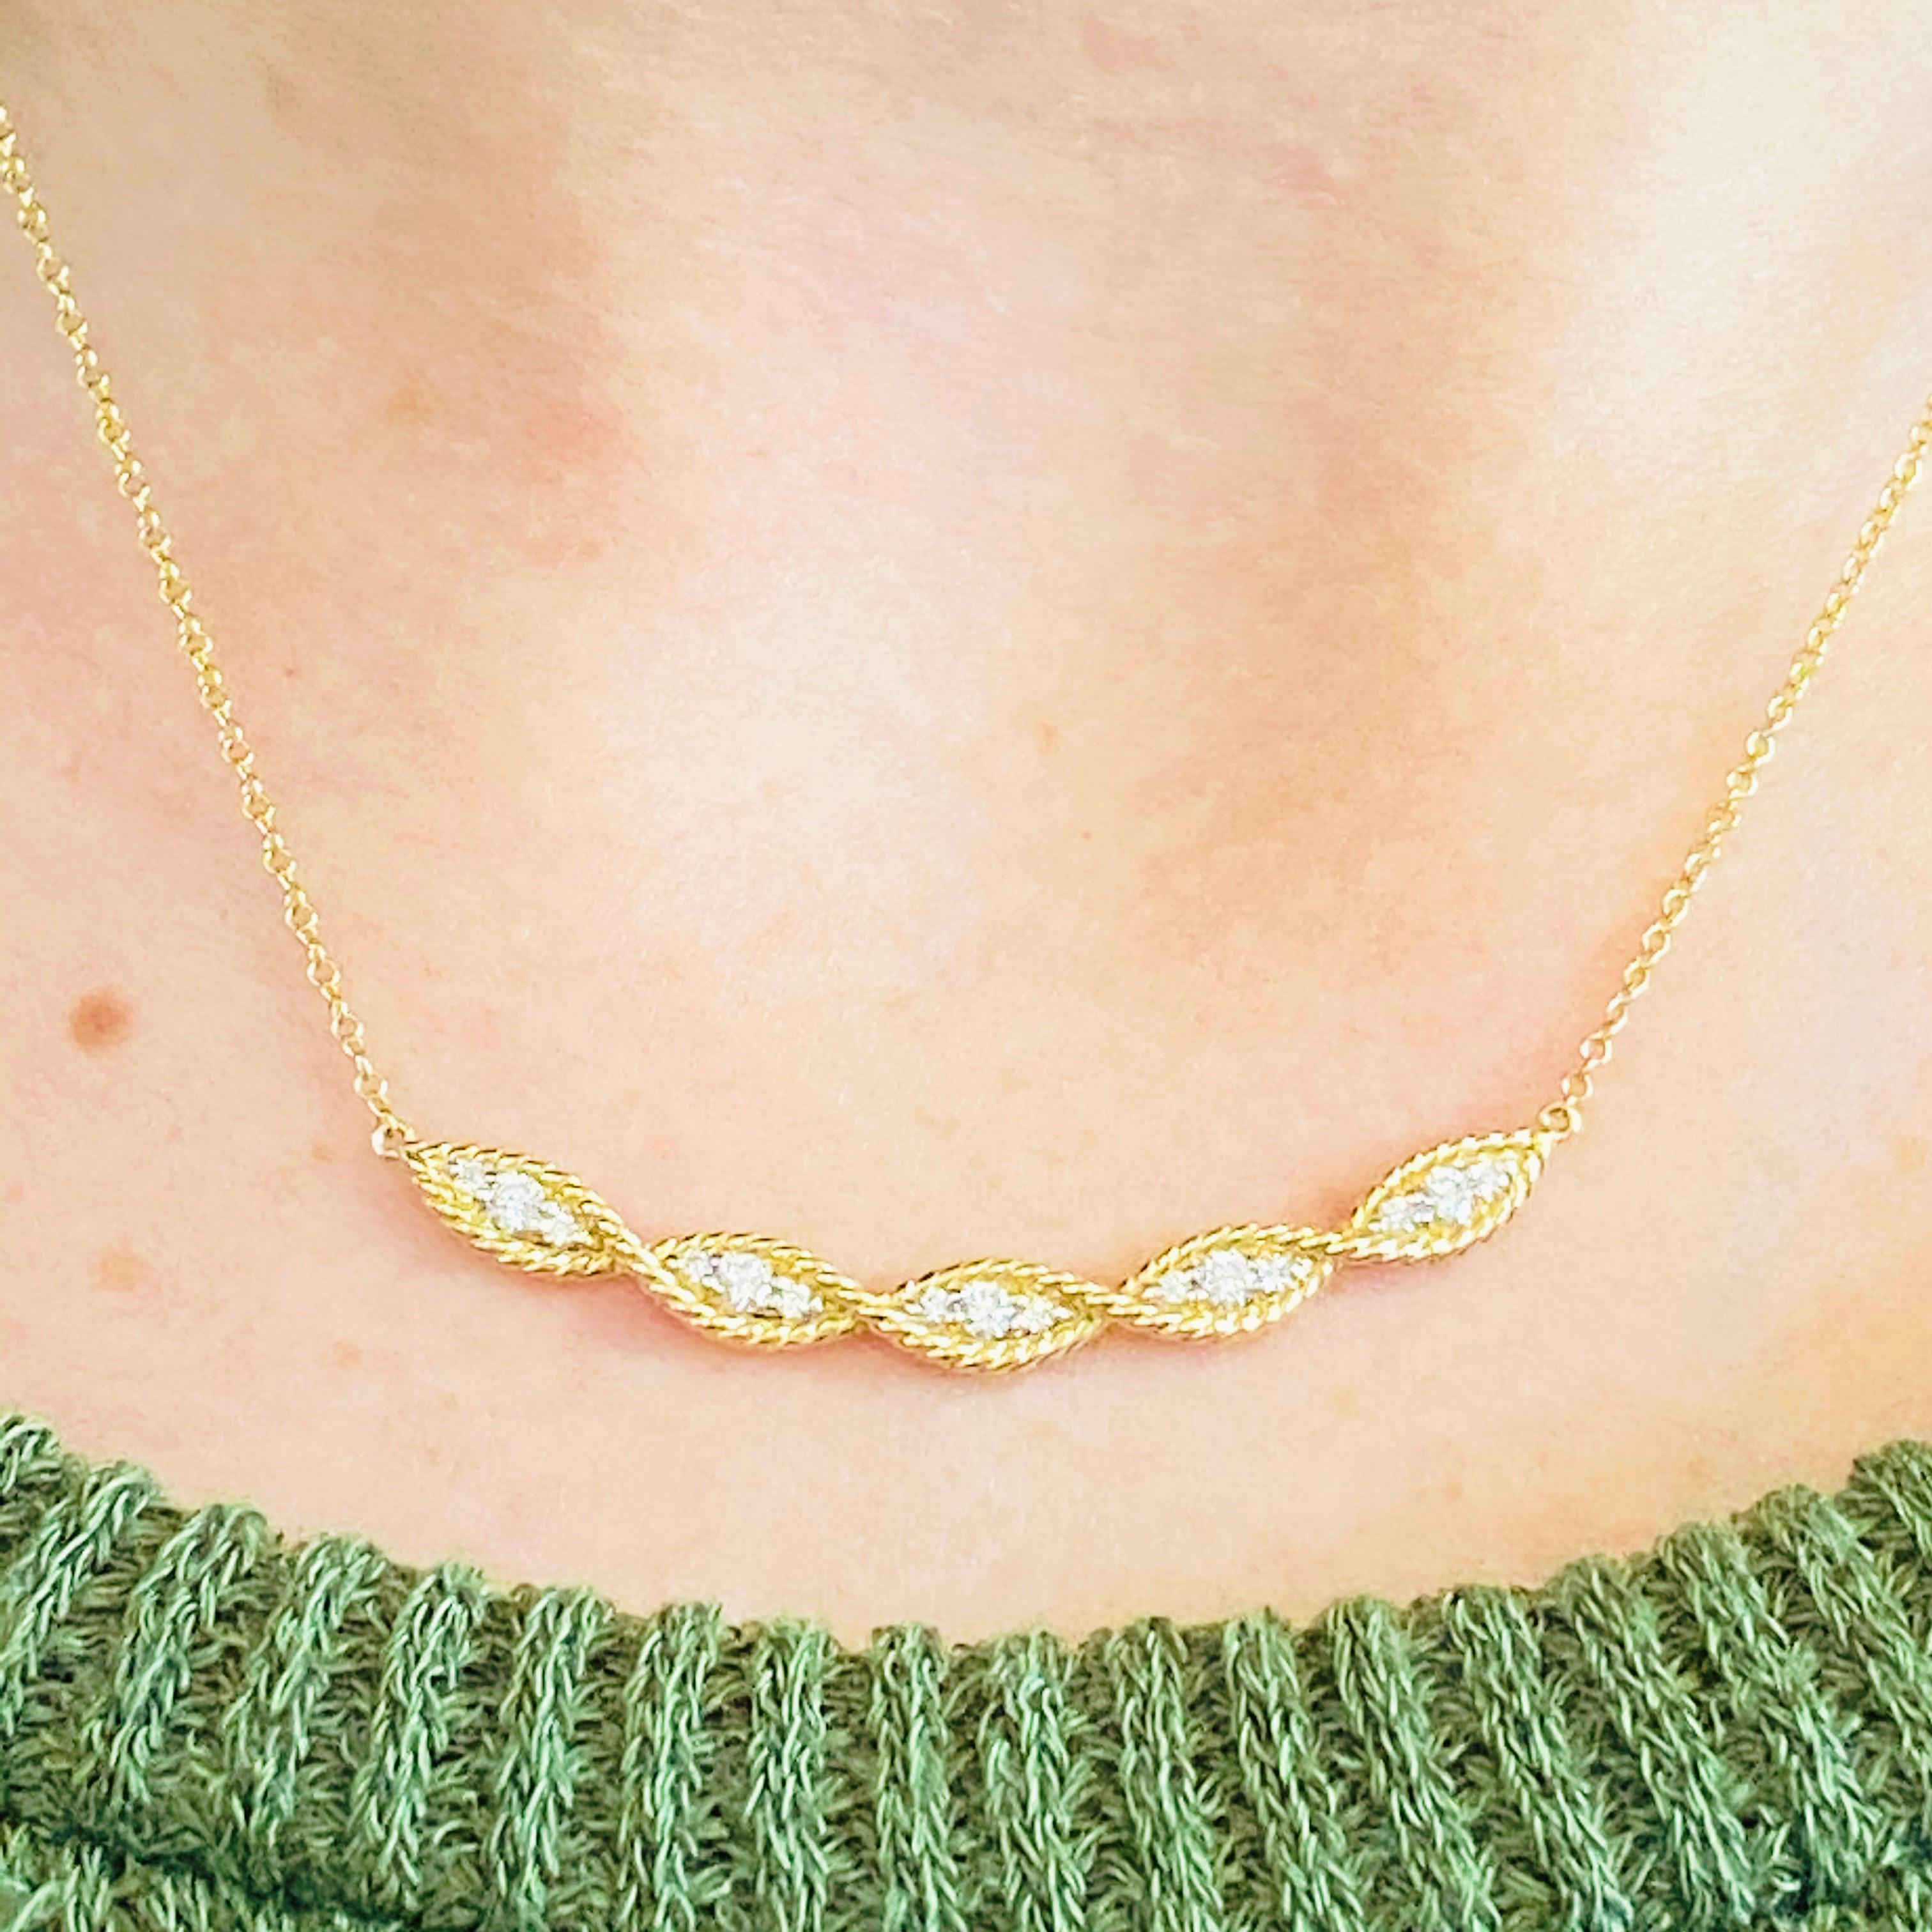 This Gabriel & Co. new, gorgeous 14k yellow gold twisted rope curved diamond bar necklace dripping with diamonds is the perfect mix between classic and trendy! This necklace is very fashionable and can add a touch of style to any outfit, yet it is